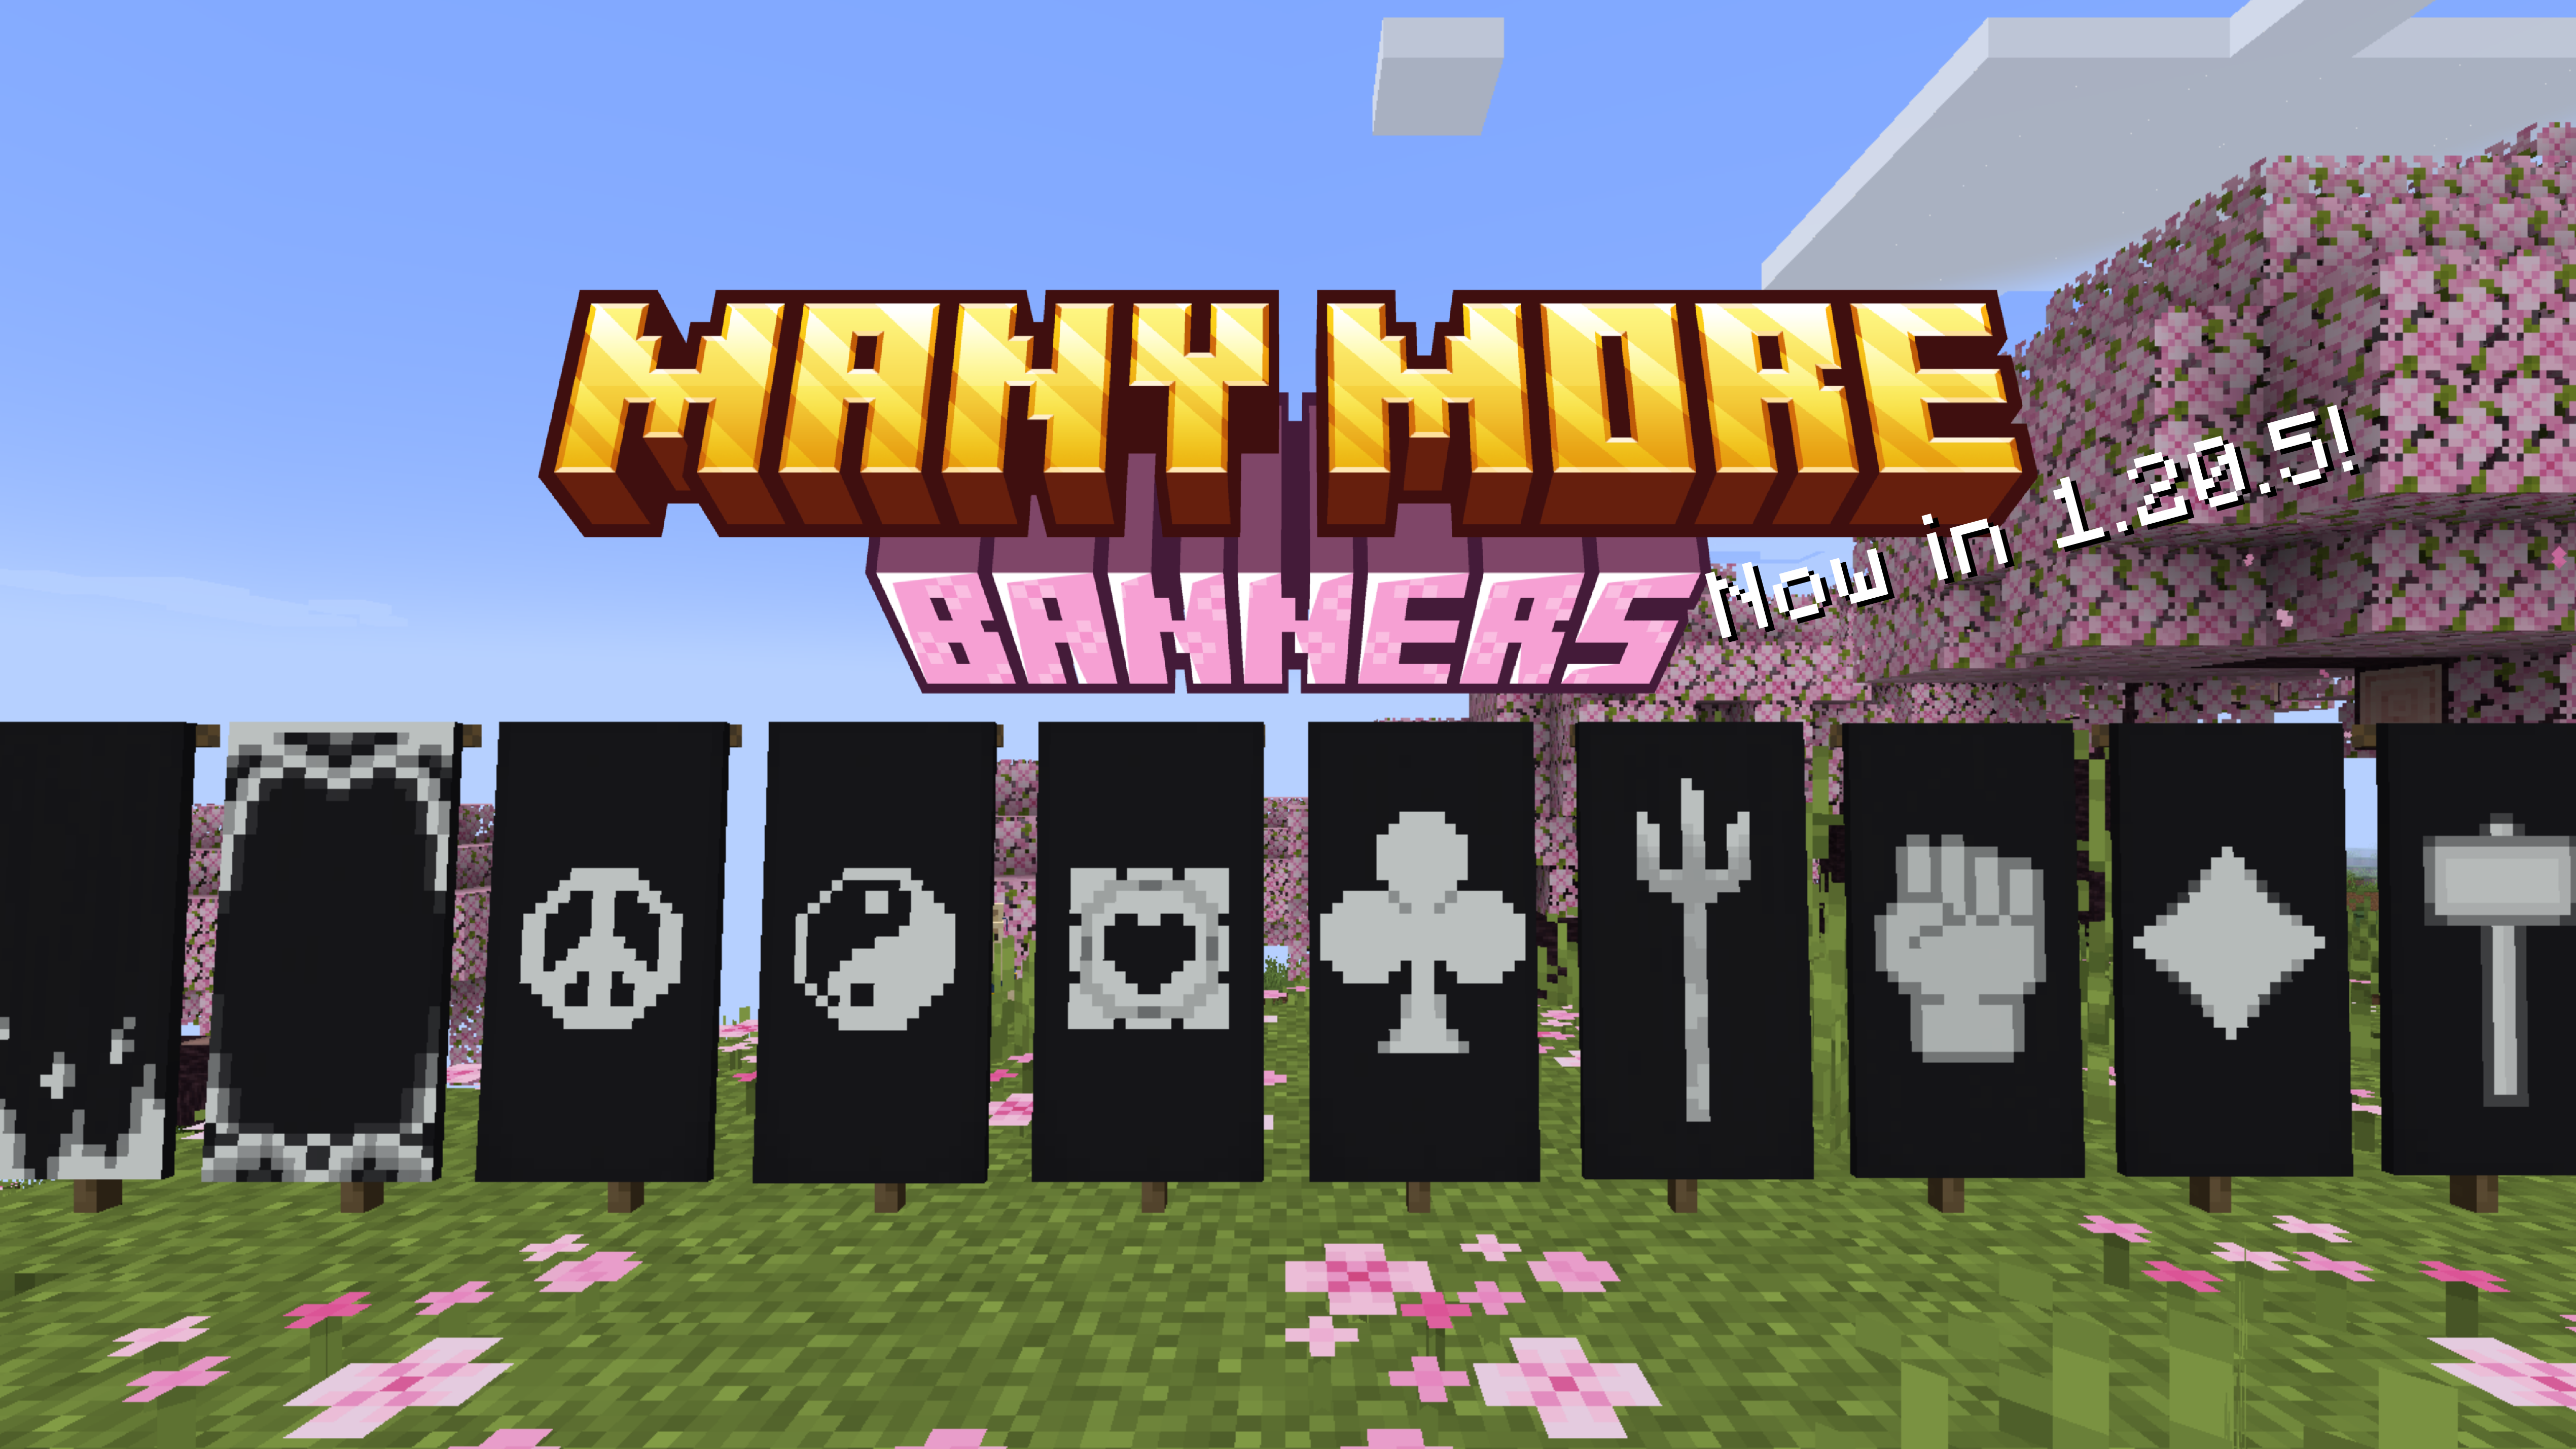 A Minecraft Datapack / Resource Pack that adds many more banner patterns to the game.